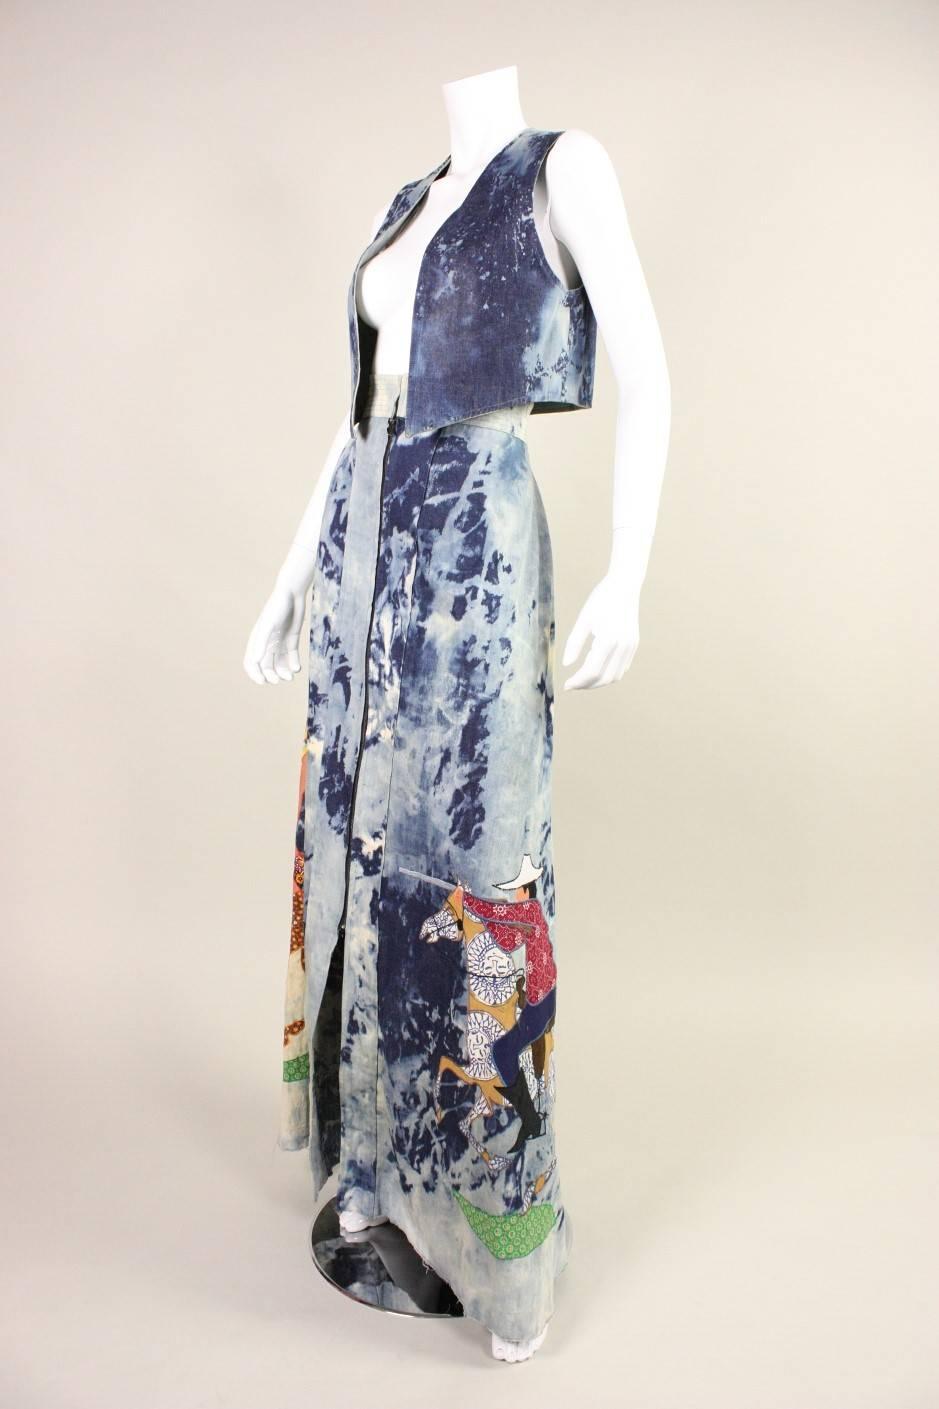 Vintage ensemble from Serendipity 3 is made of acid-washed denim and features an amazing appliqued cowboy/Indian scene.  Vest is reversible with no closures and a pocket.  Maxi skirt has a zippered front and is unlined.  This item is extremely rare